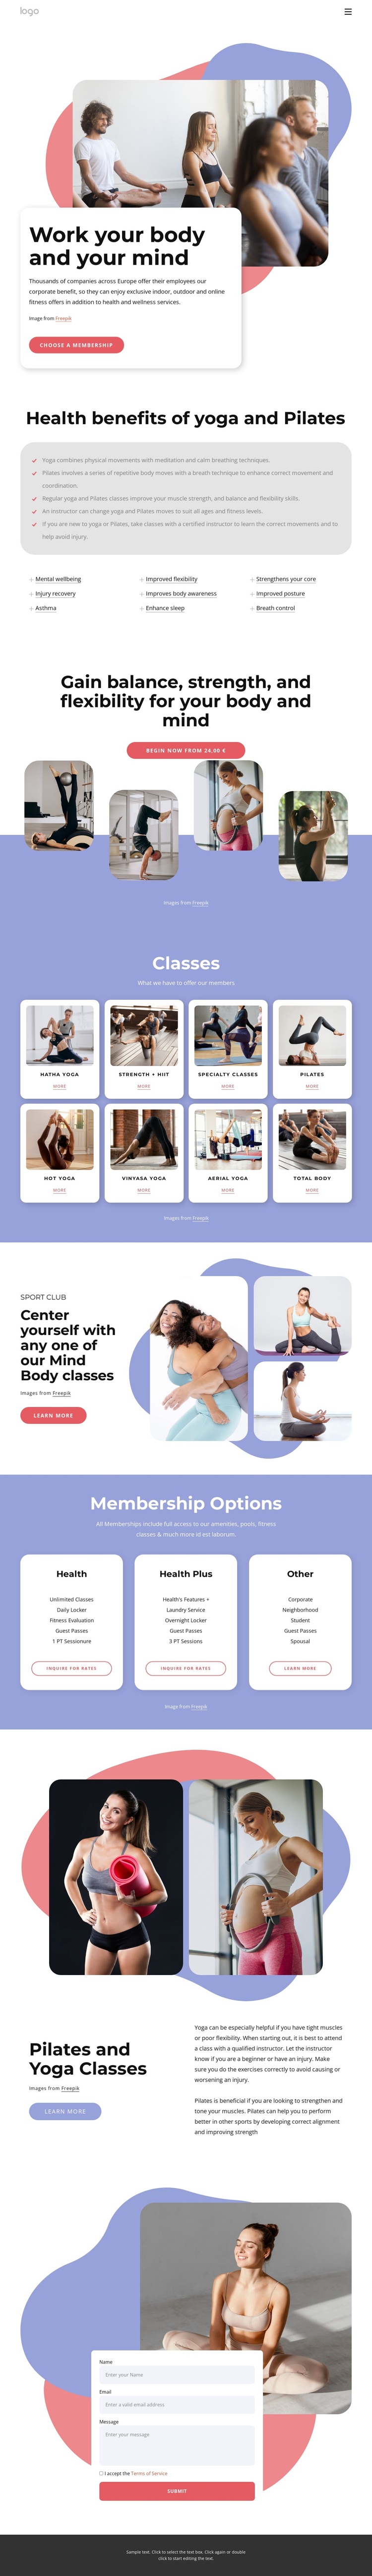 Pilates and yoga classes Joomla Page Builder